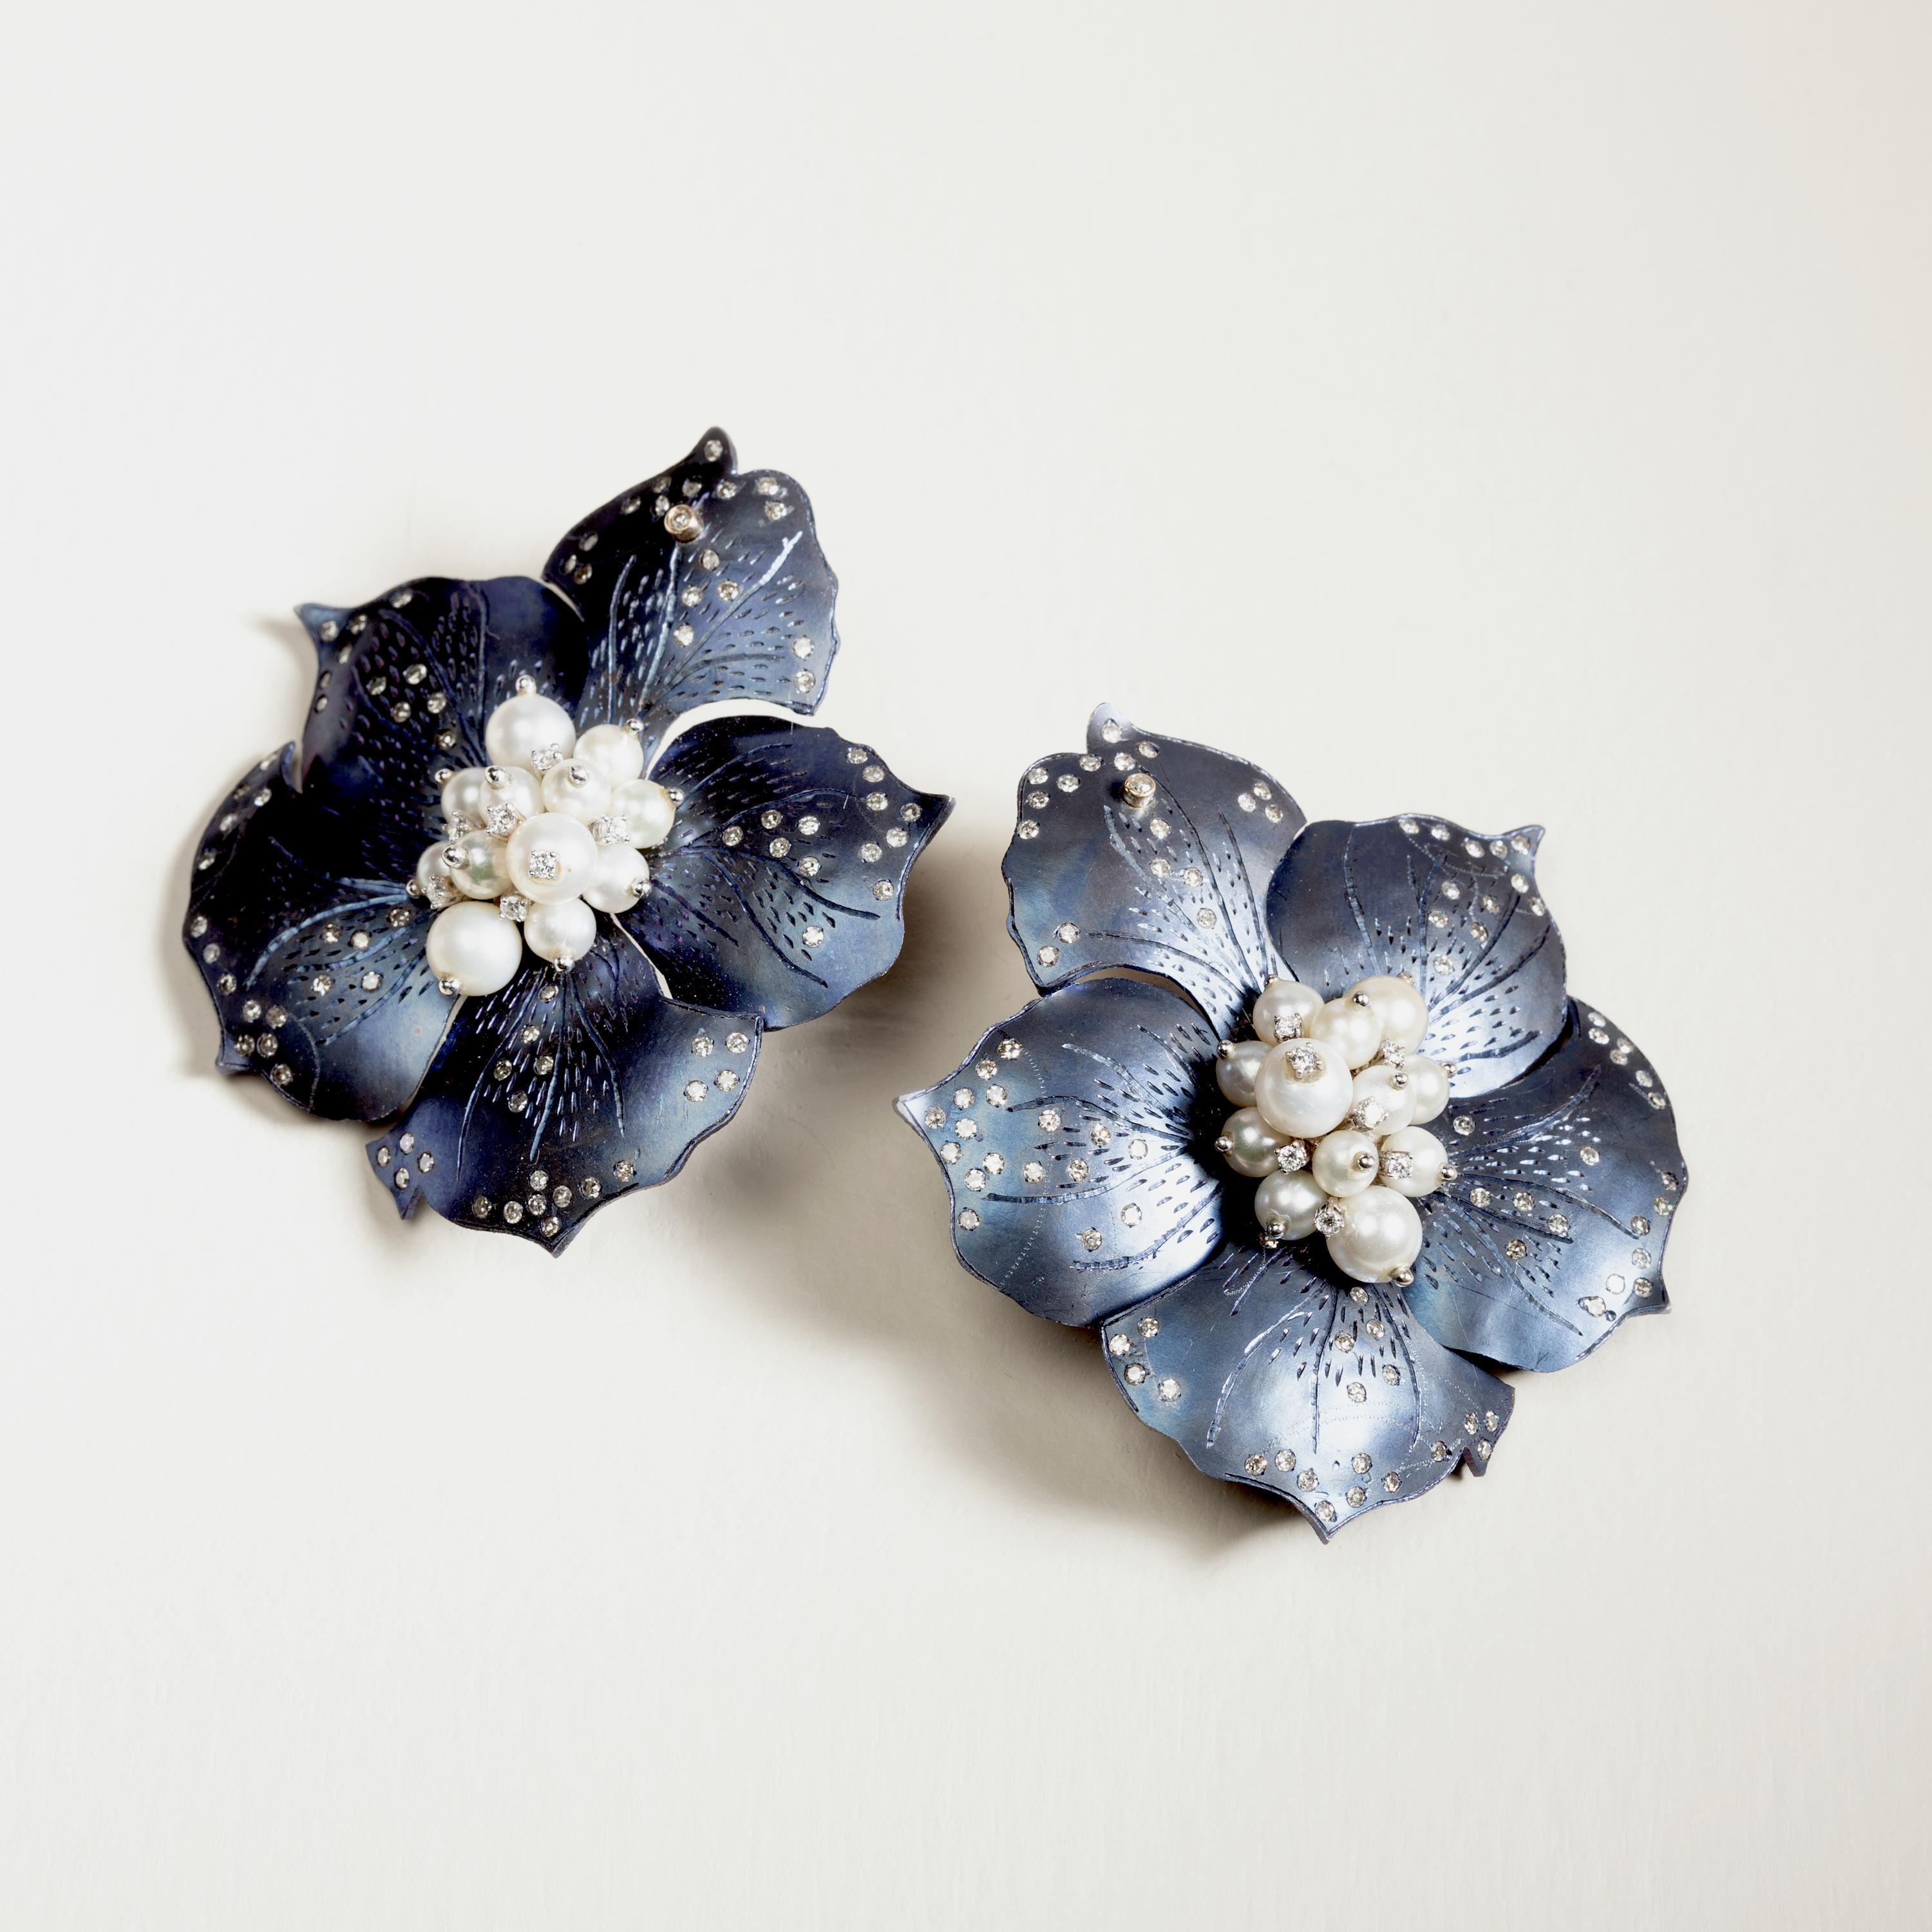 “Forget-me-not Flowers“ 

The flower has its name from a legend dating back to the 15th century, stating that whoever was wearing it, would not be forgotten by their loved ones. Handcrafted pair of blue-tinted Titanium flowers with 18kt gold push